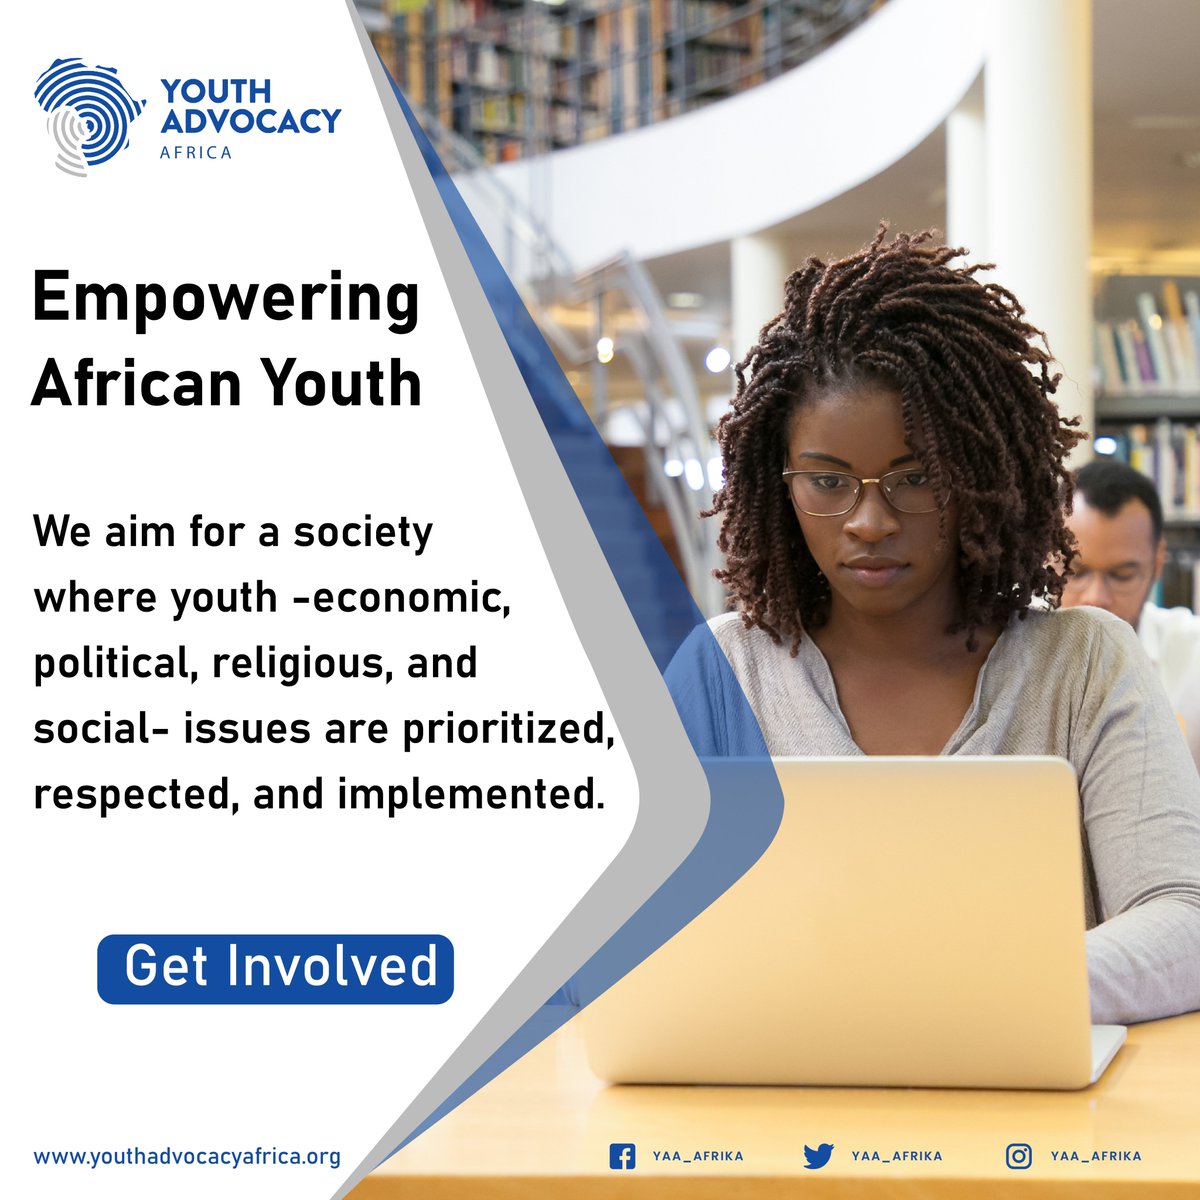 @YAA_Africa is a youth-led, youth-focused, not-for-profit, pan-African org #advocating for #youthempowerment ways to tackle the effects of #intergenerationalpoverty. We seek to foster the #development of an #inclusivesociety where #youth are #empowered. Visit our website #Today.